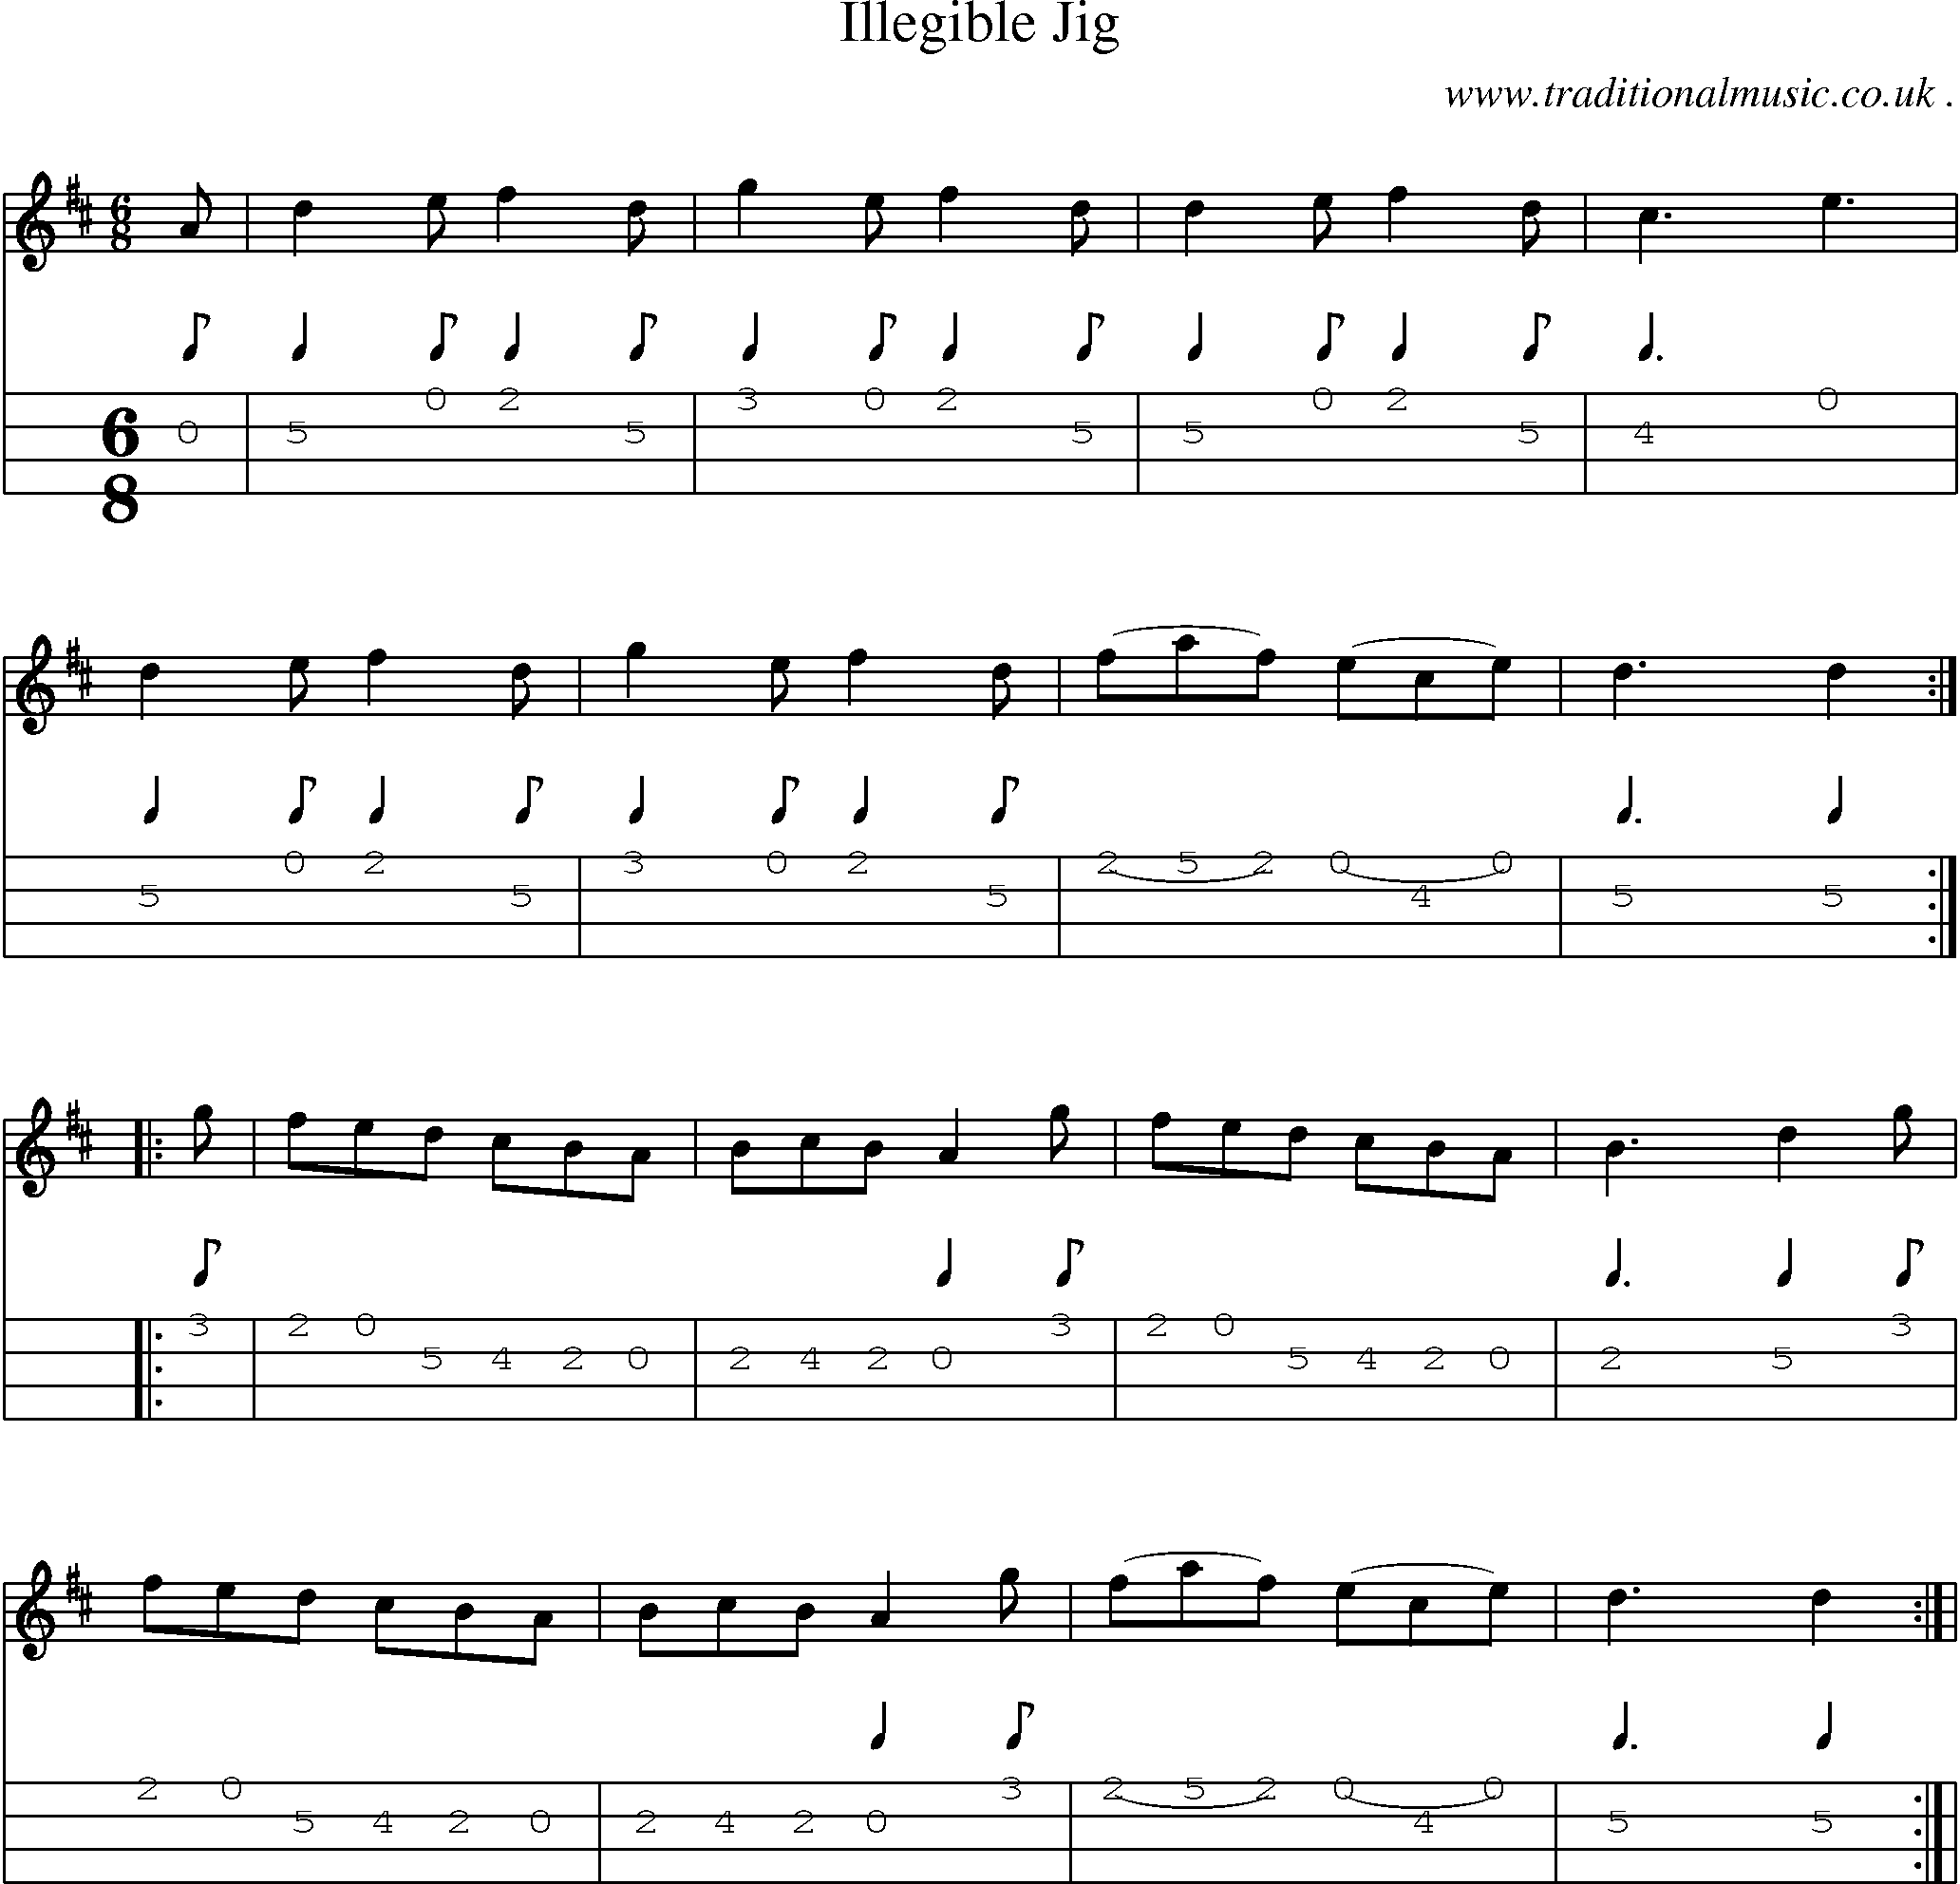 Sheet-Music and Mandolin Tabs for Illegible Jig